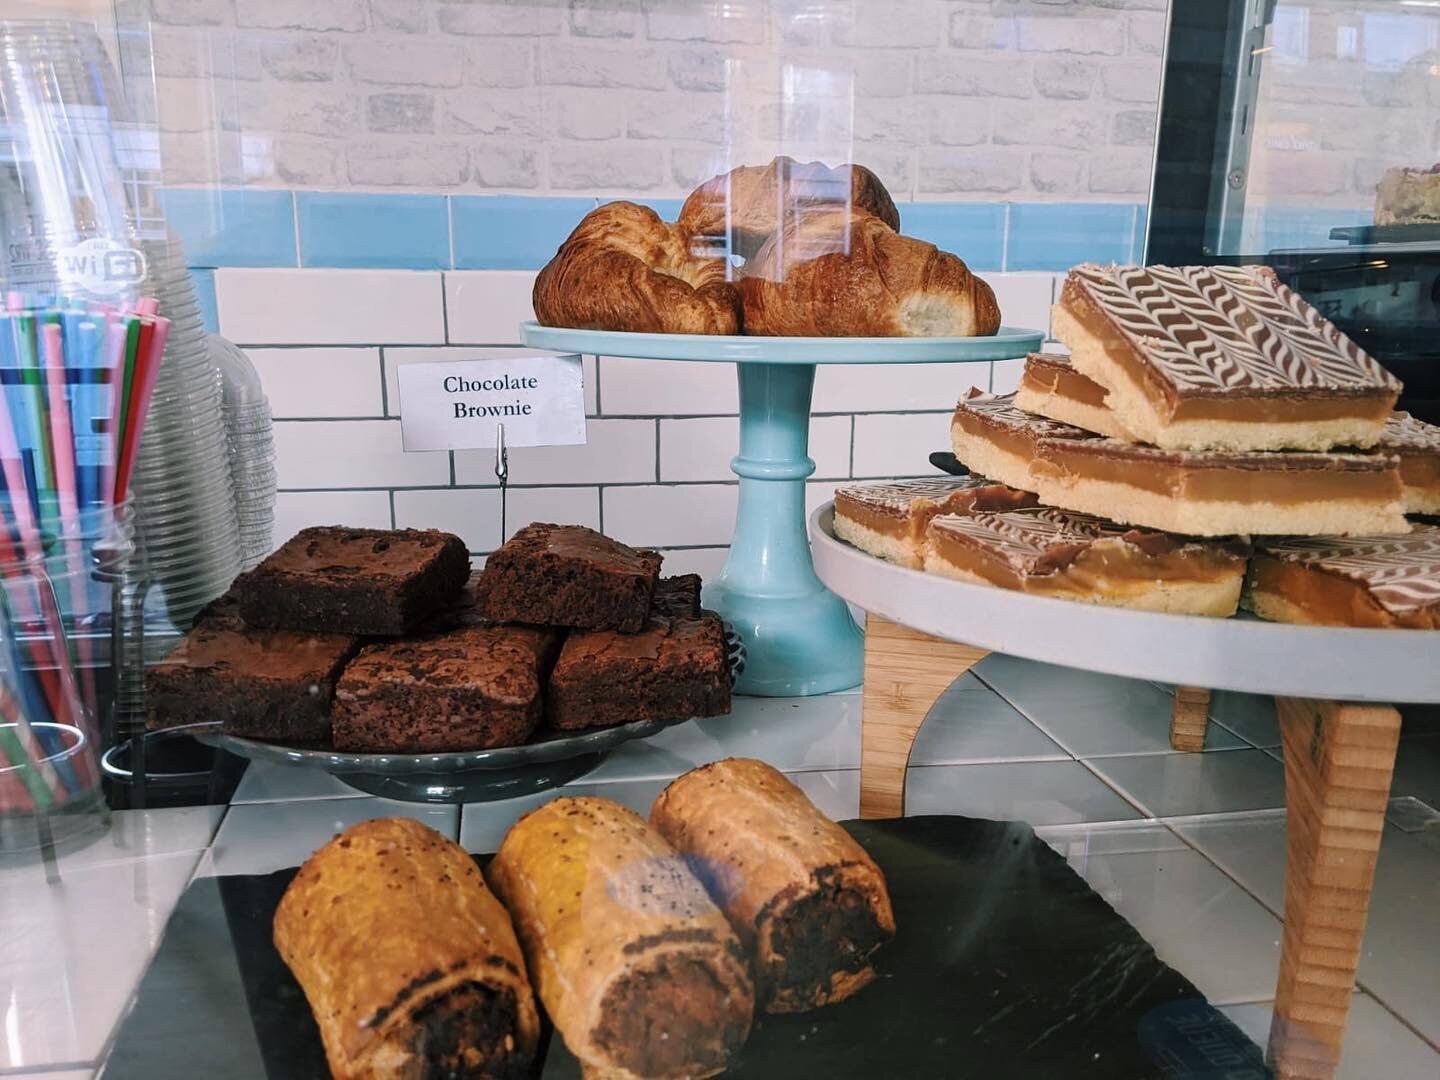 Cakes, pastries &amp; vegan sausage rolls. What else could you need! 
.
.
.
.
.
.
.
.
.
.
.
.
#nottingham #notts #lovenotts #indienotts #visitnottingham #cafe #hockley #cafes #breakfast #brunch #lunch #cake #coffee #cakeandcoffee #shoplocal #indepede